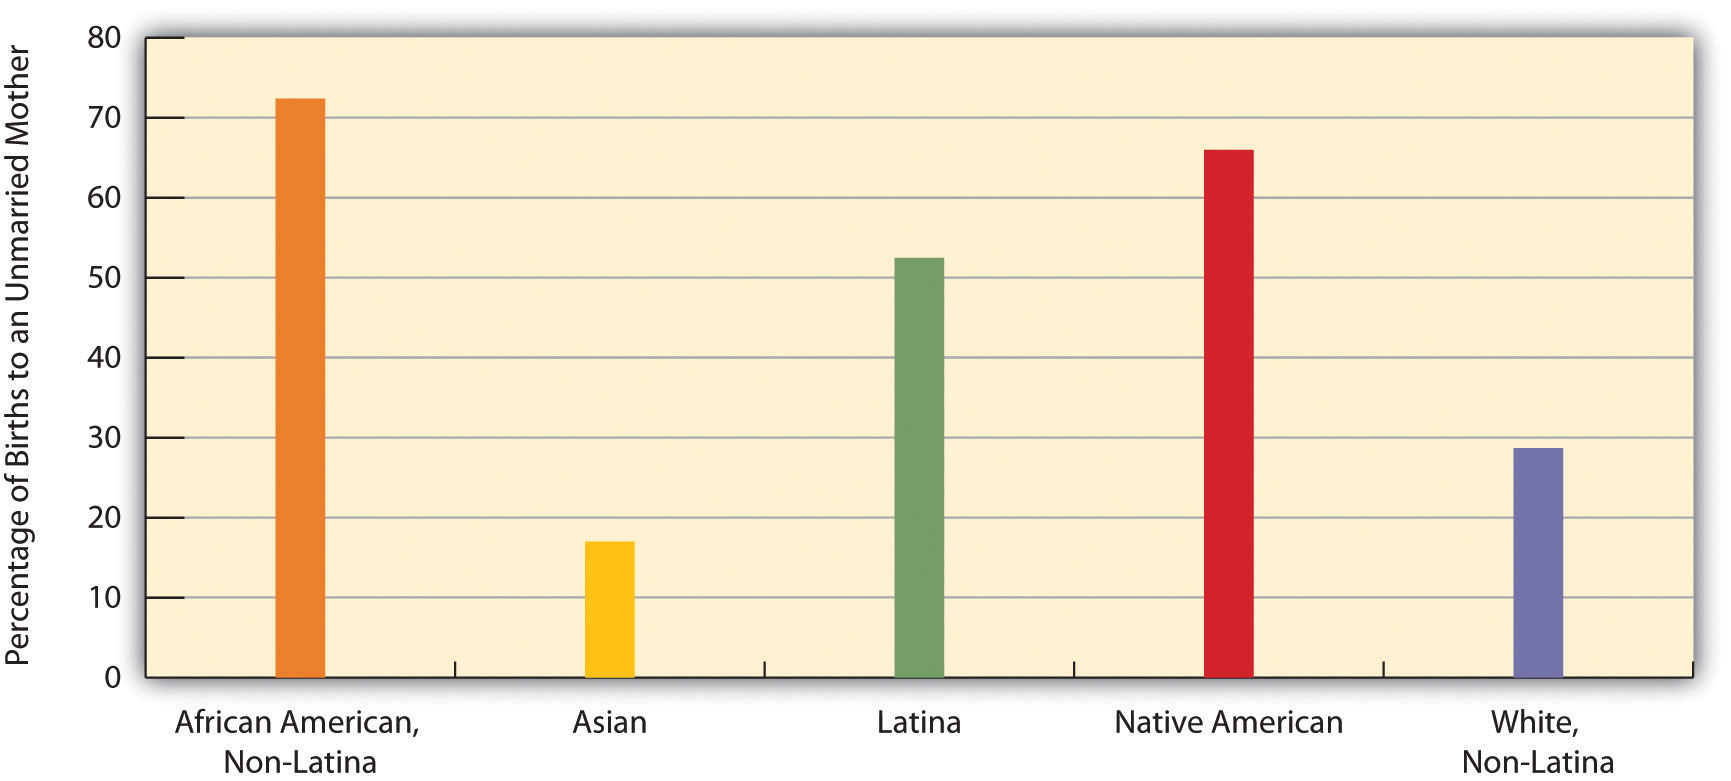 The percentage of births to unmarried mothers by race/ethnicity is most highly demonstrated in African American, Native American, and Latina women